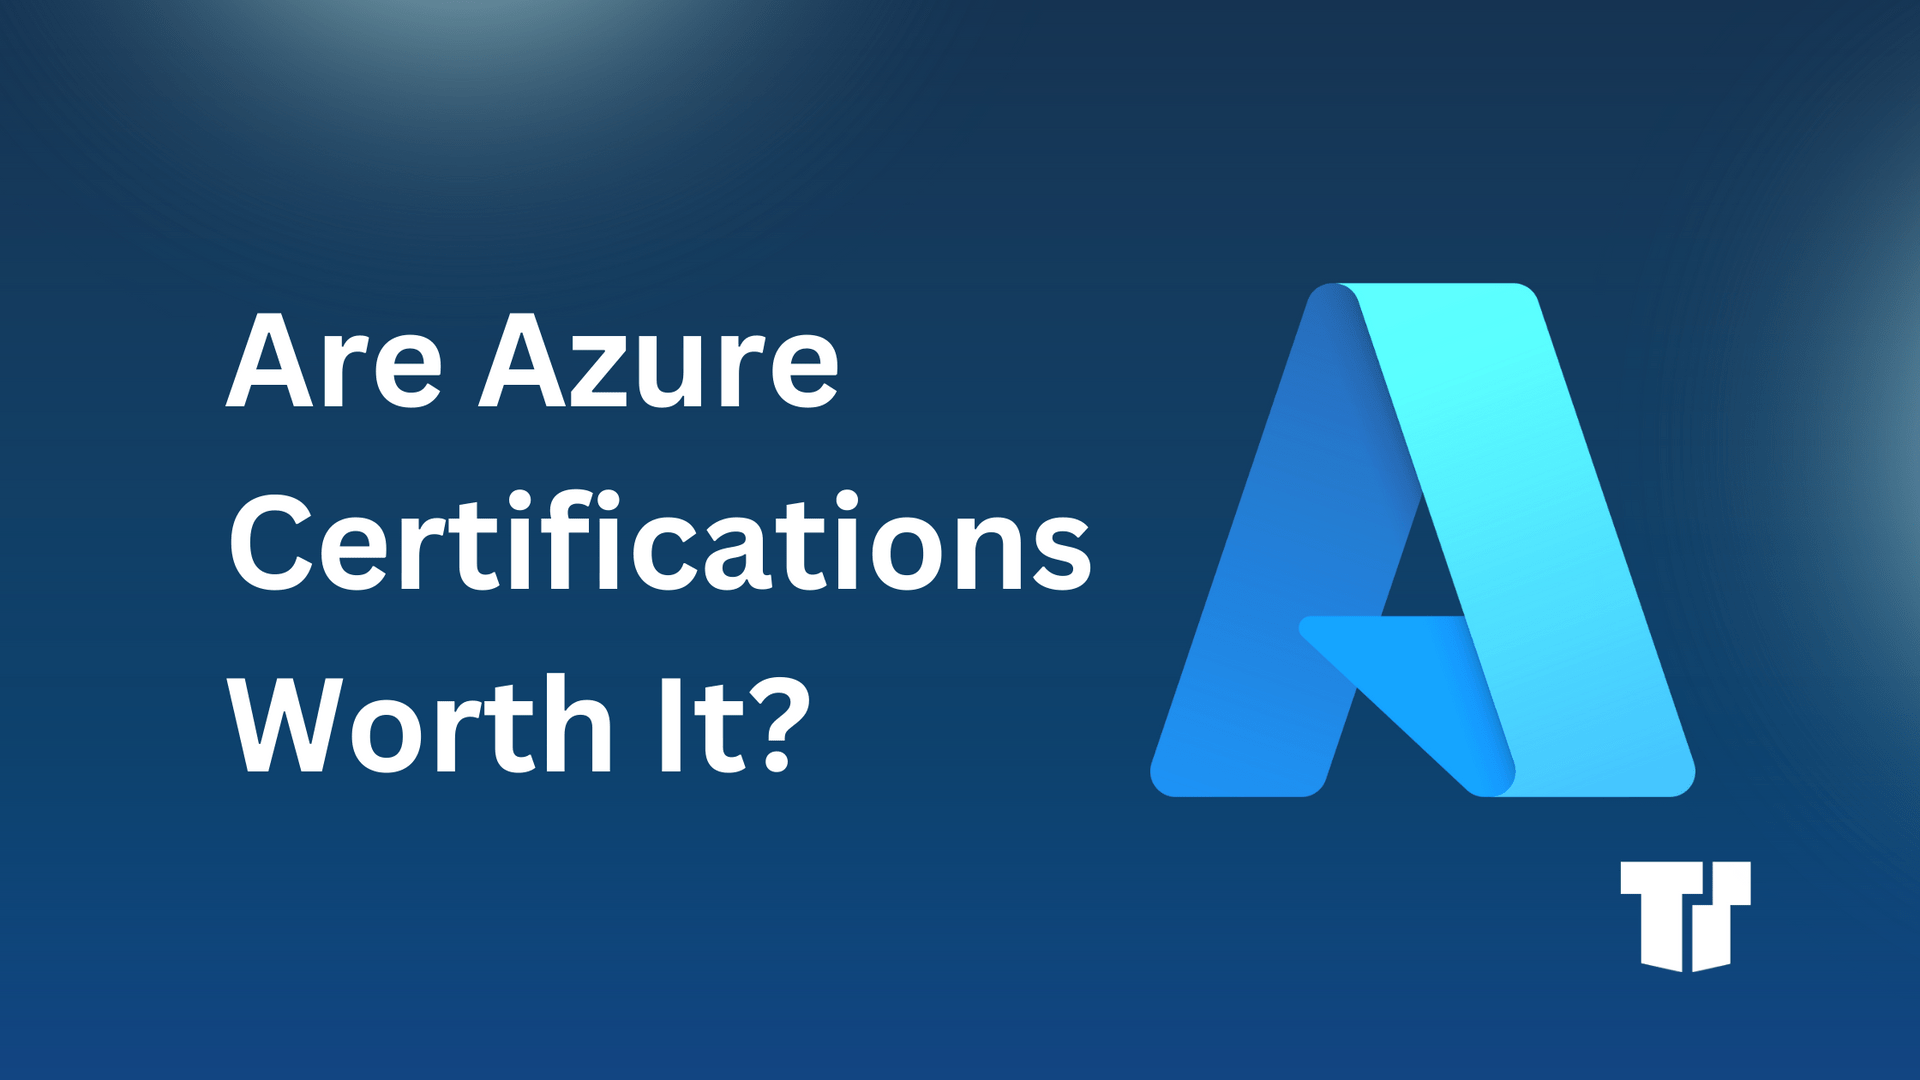 Azure Certifications: Are They Worth It? cover image